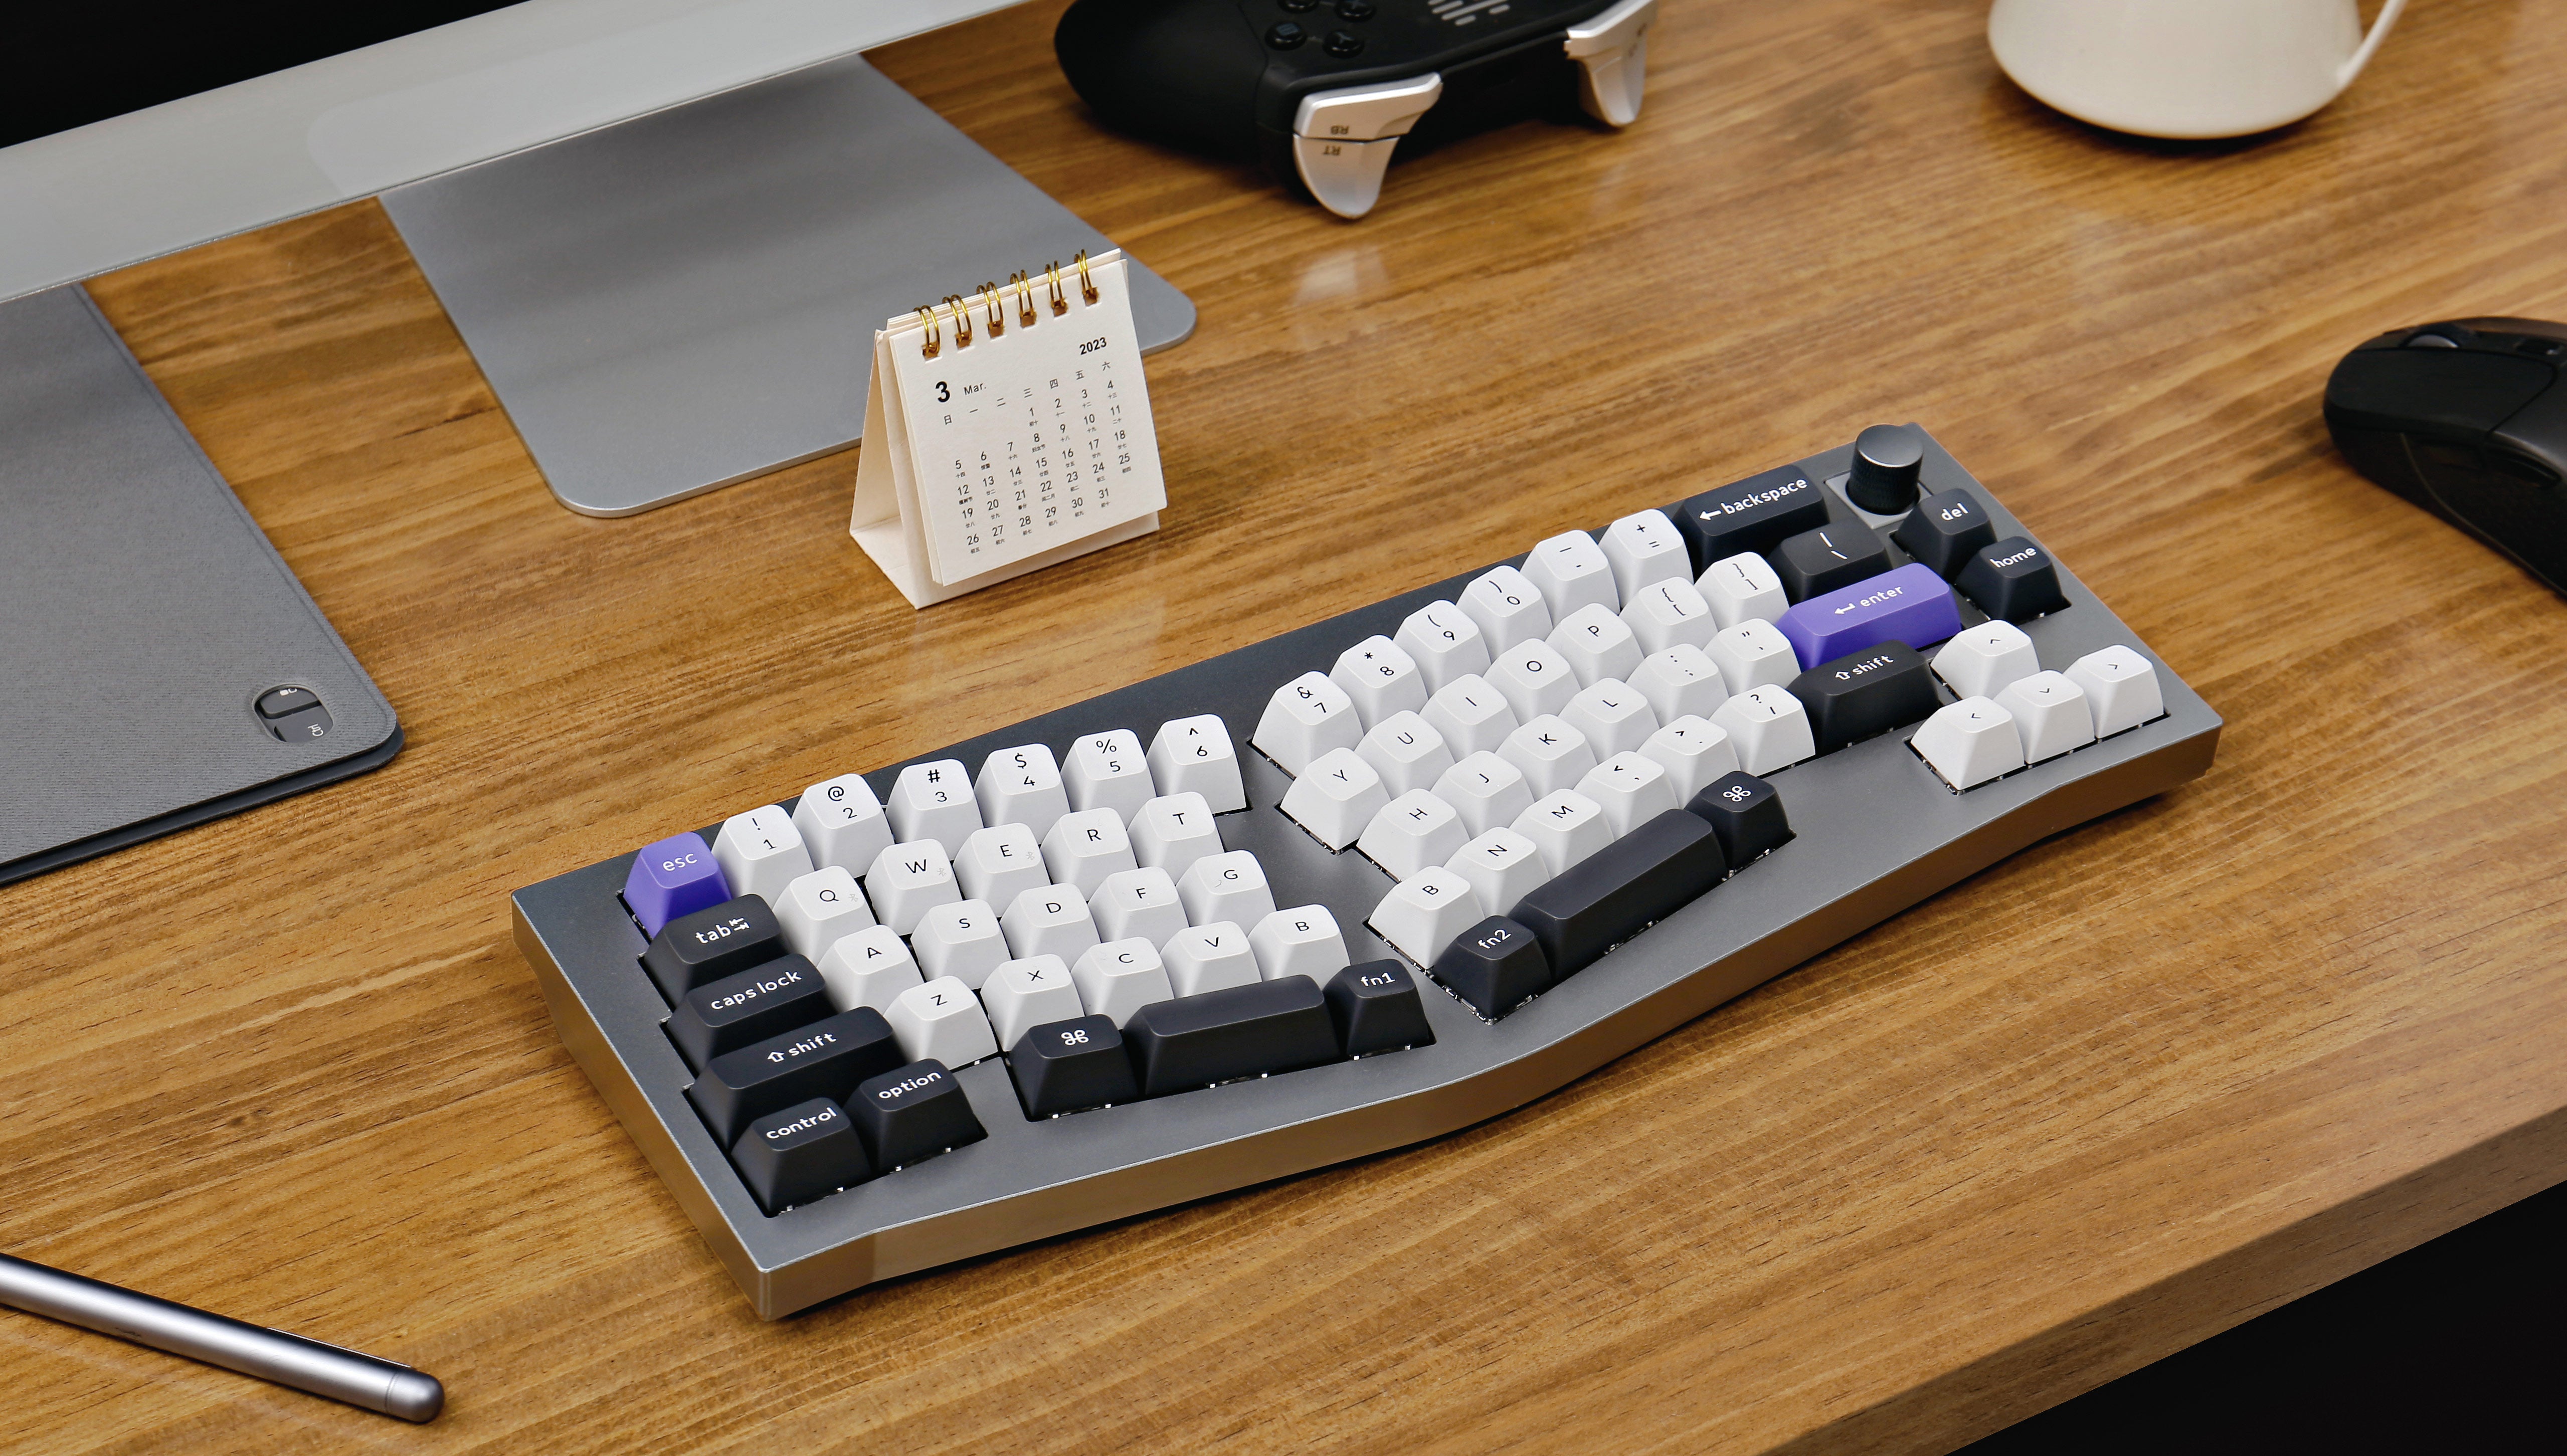 PC plate of the Keychron Q8 Pro